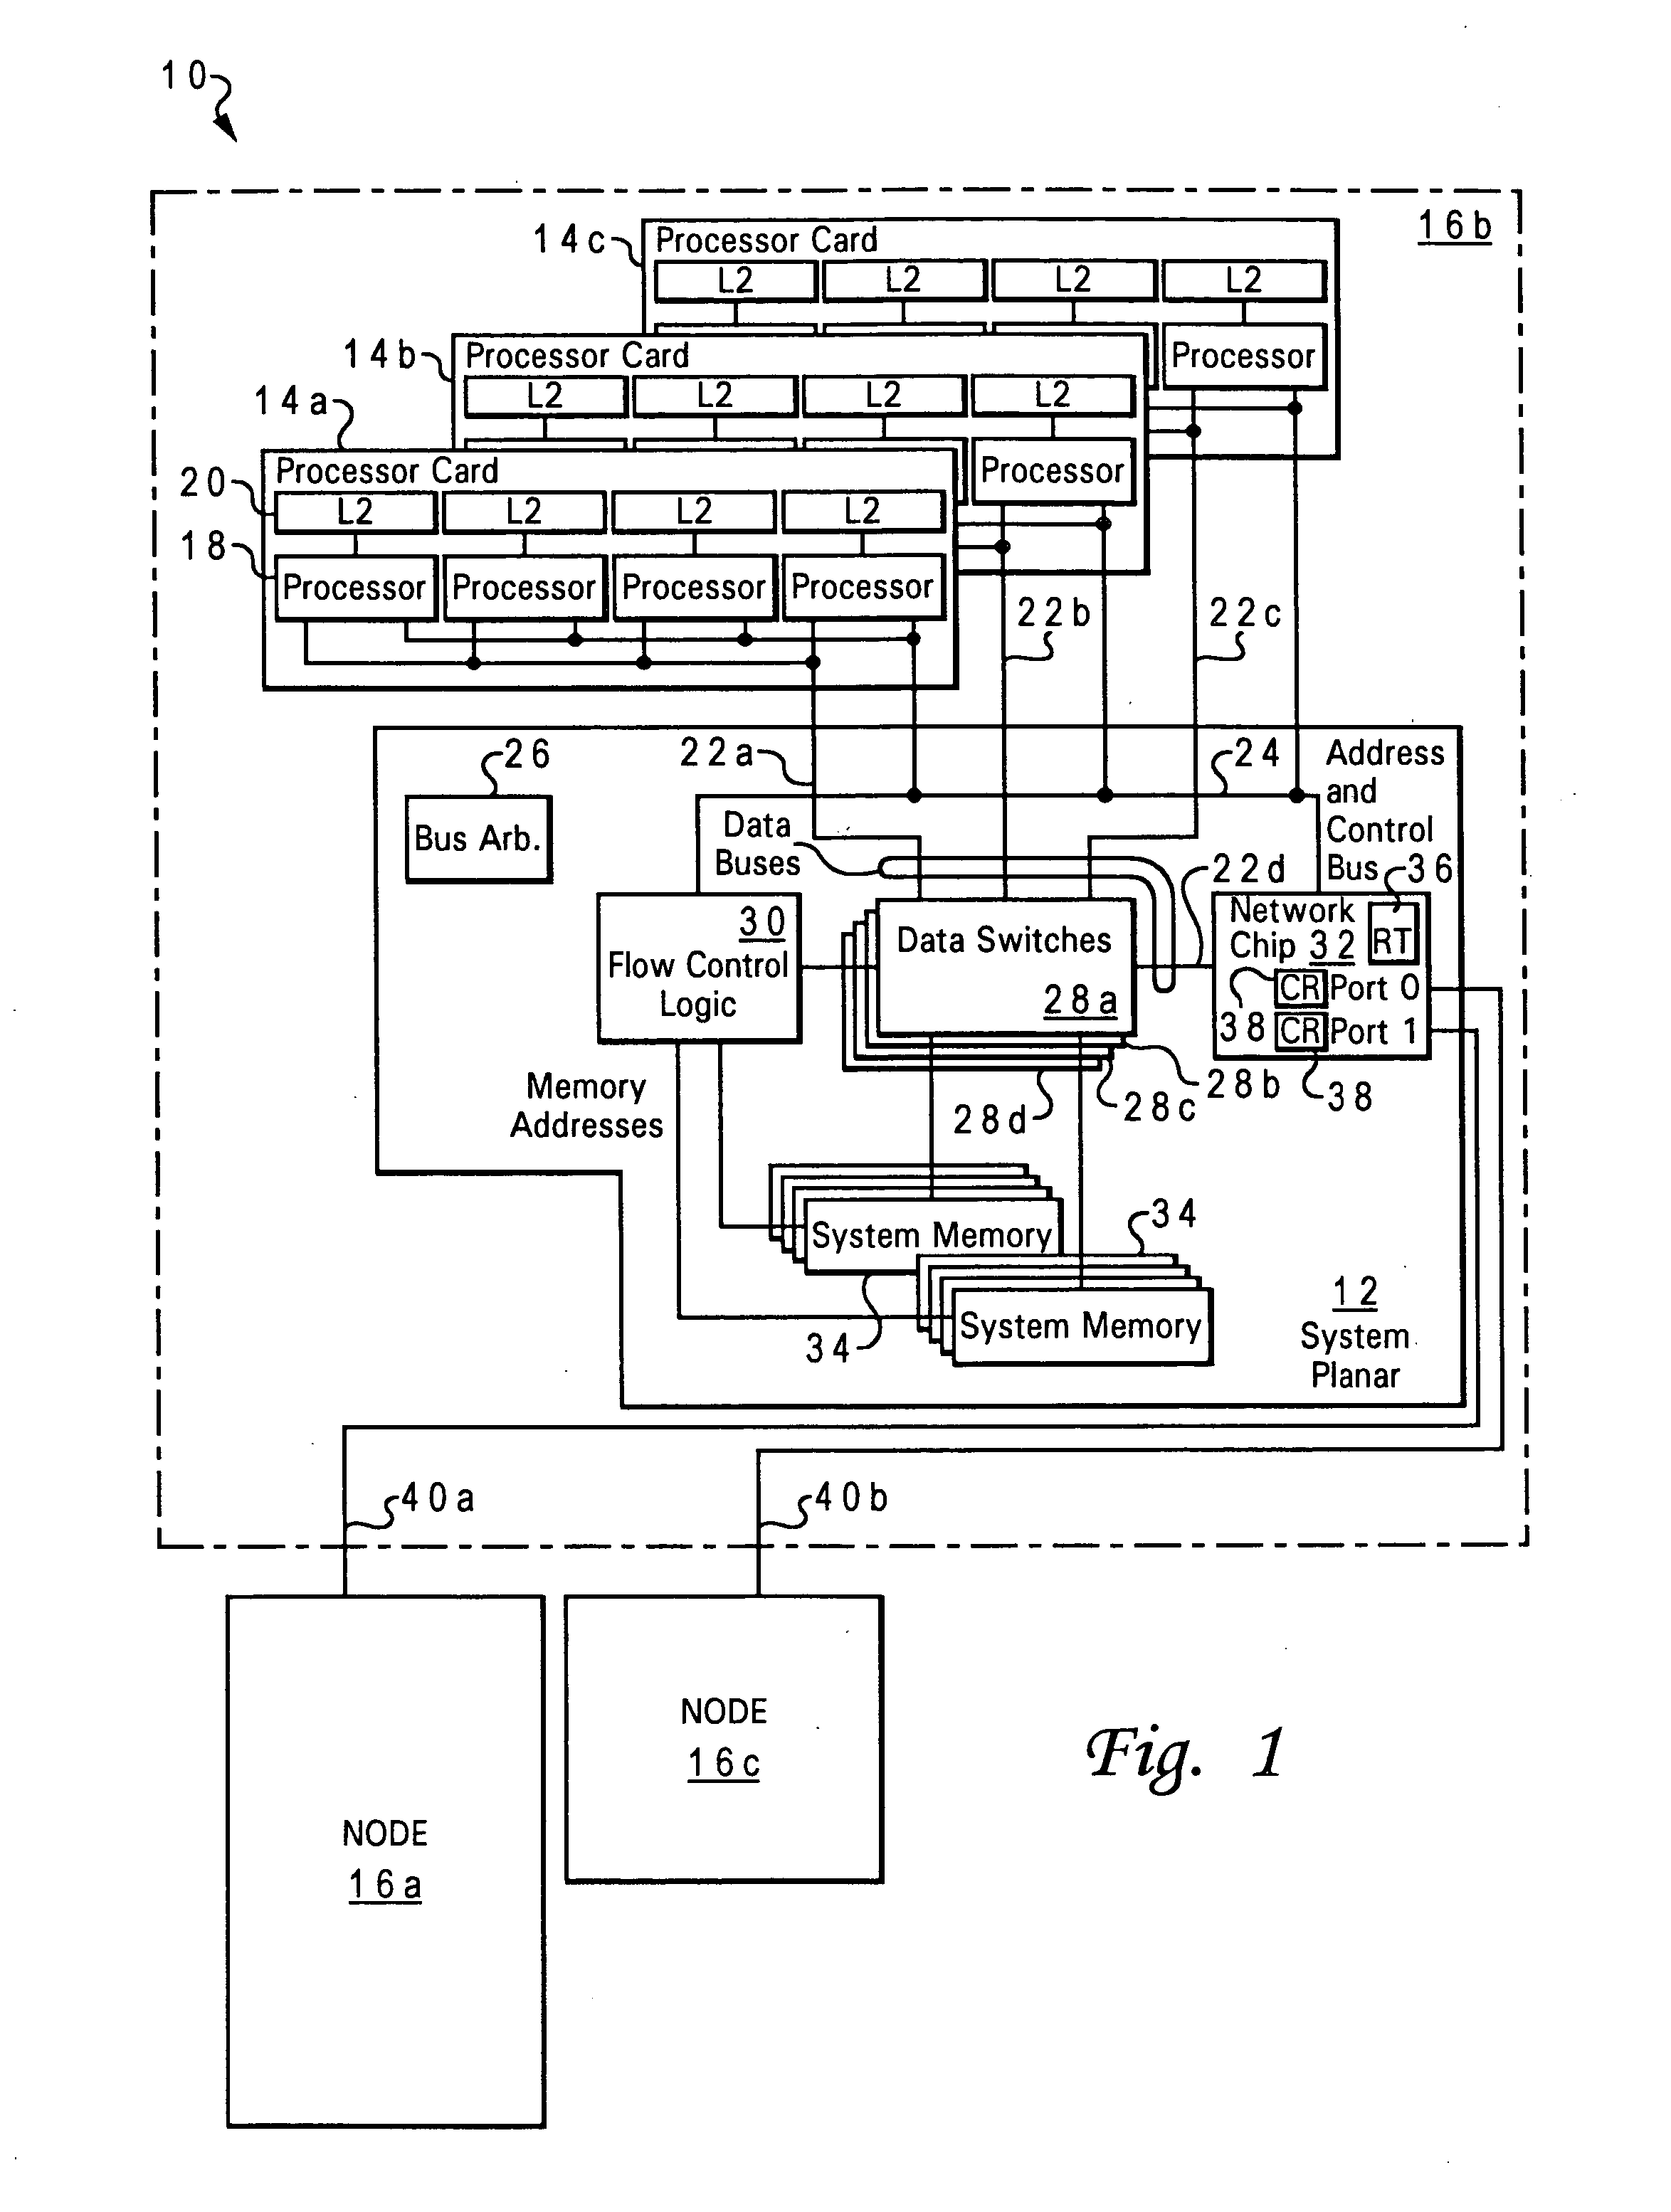 Method and system for filtering inter-node communication in a data processing system